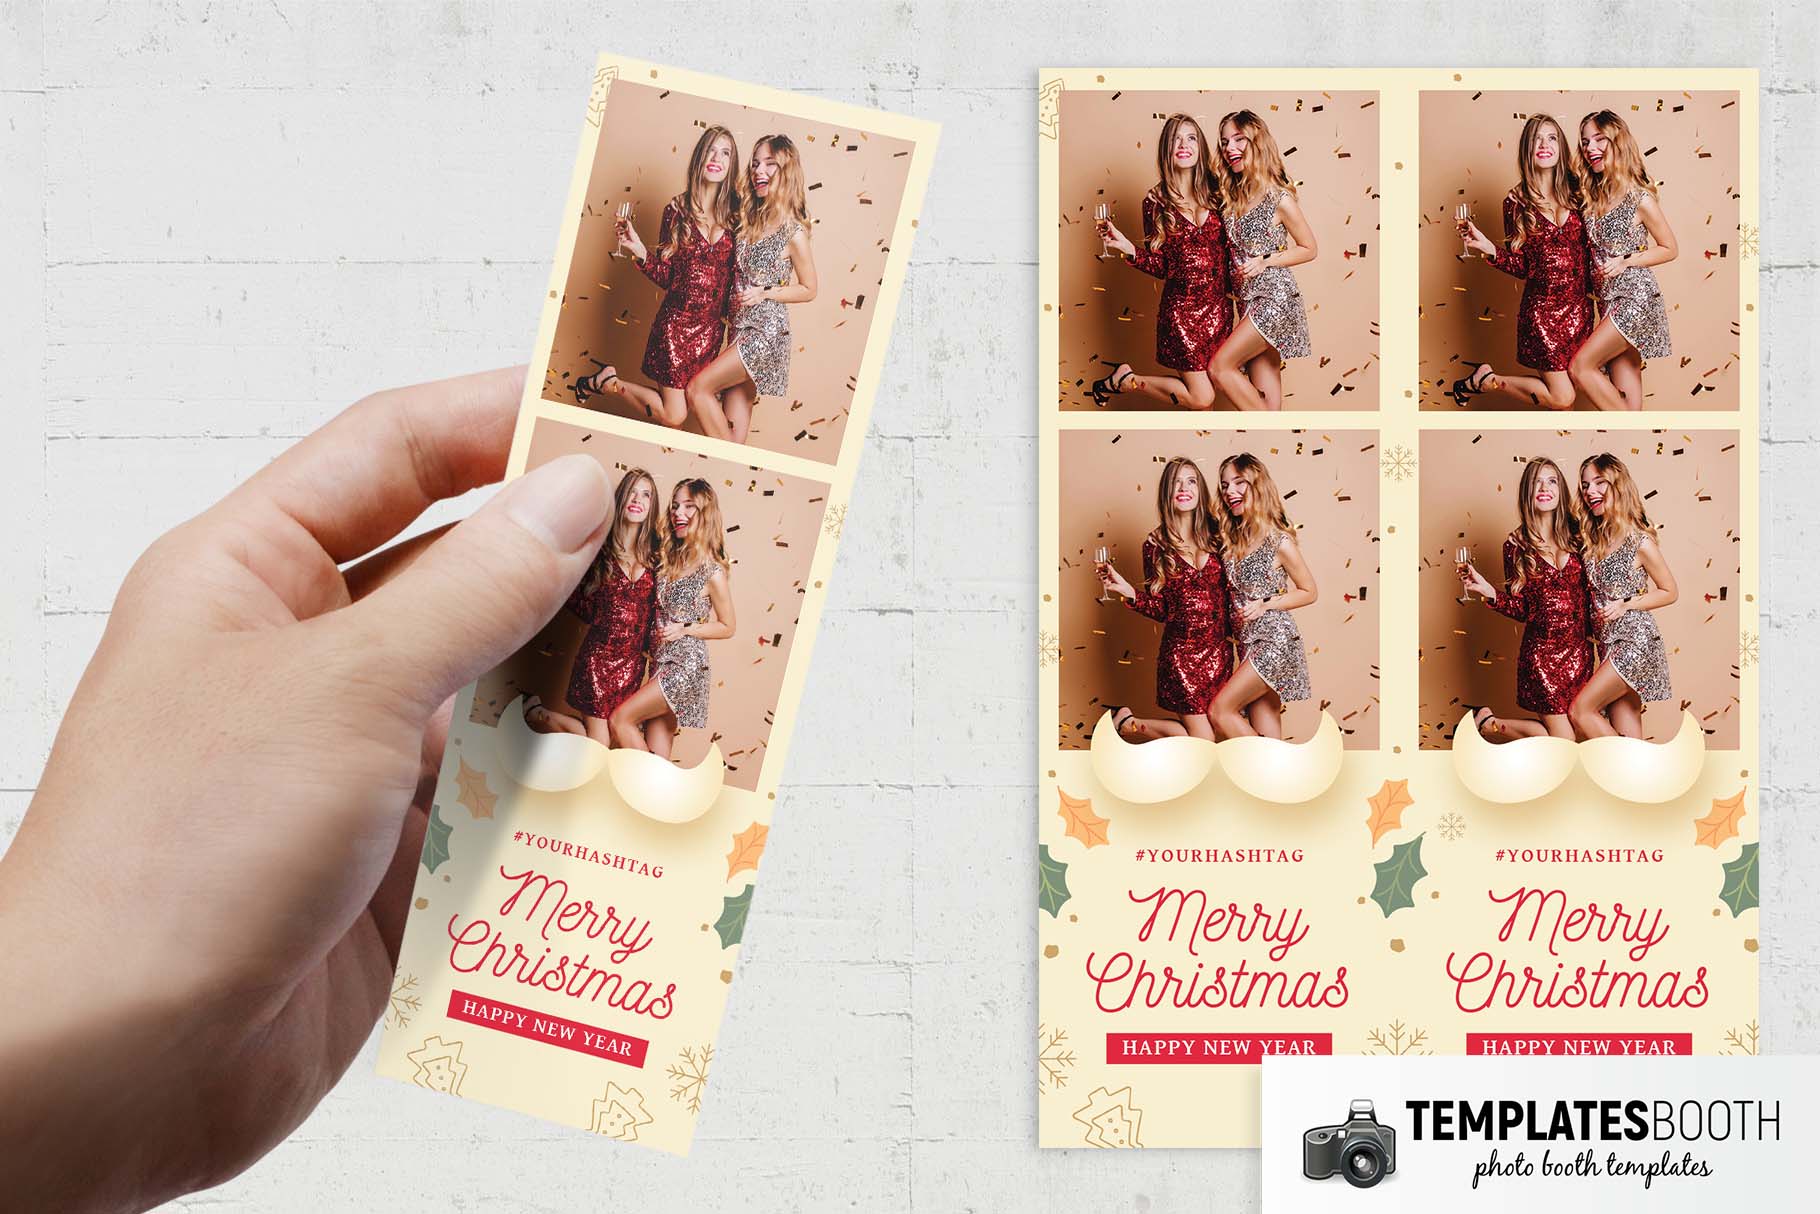 Christmas Party Photo Booth Template